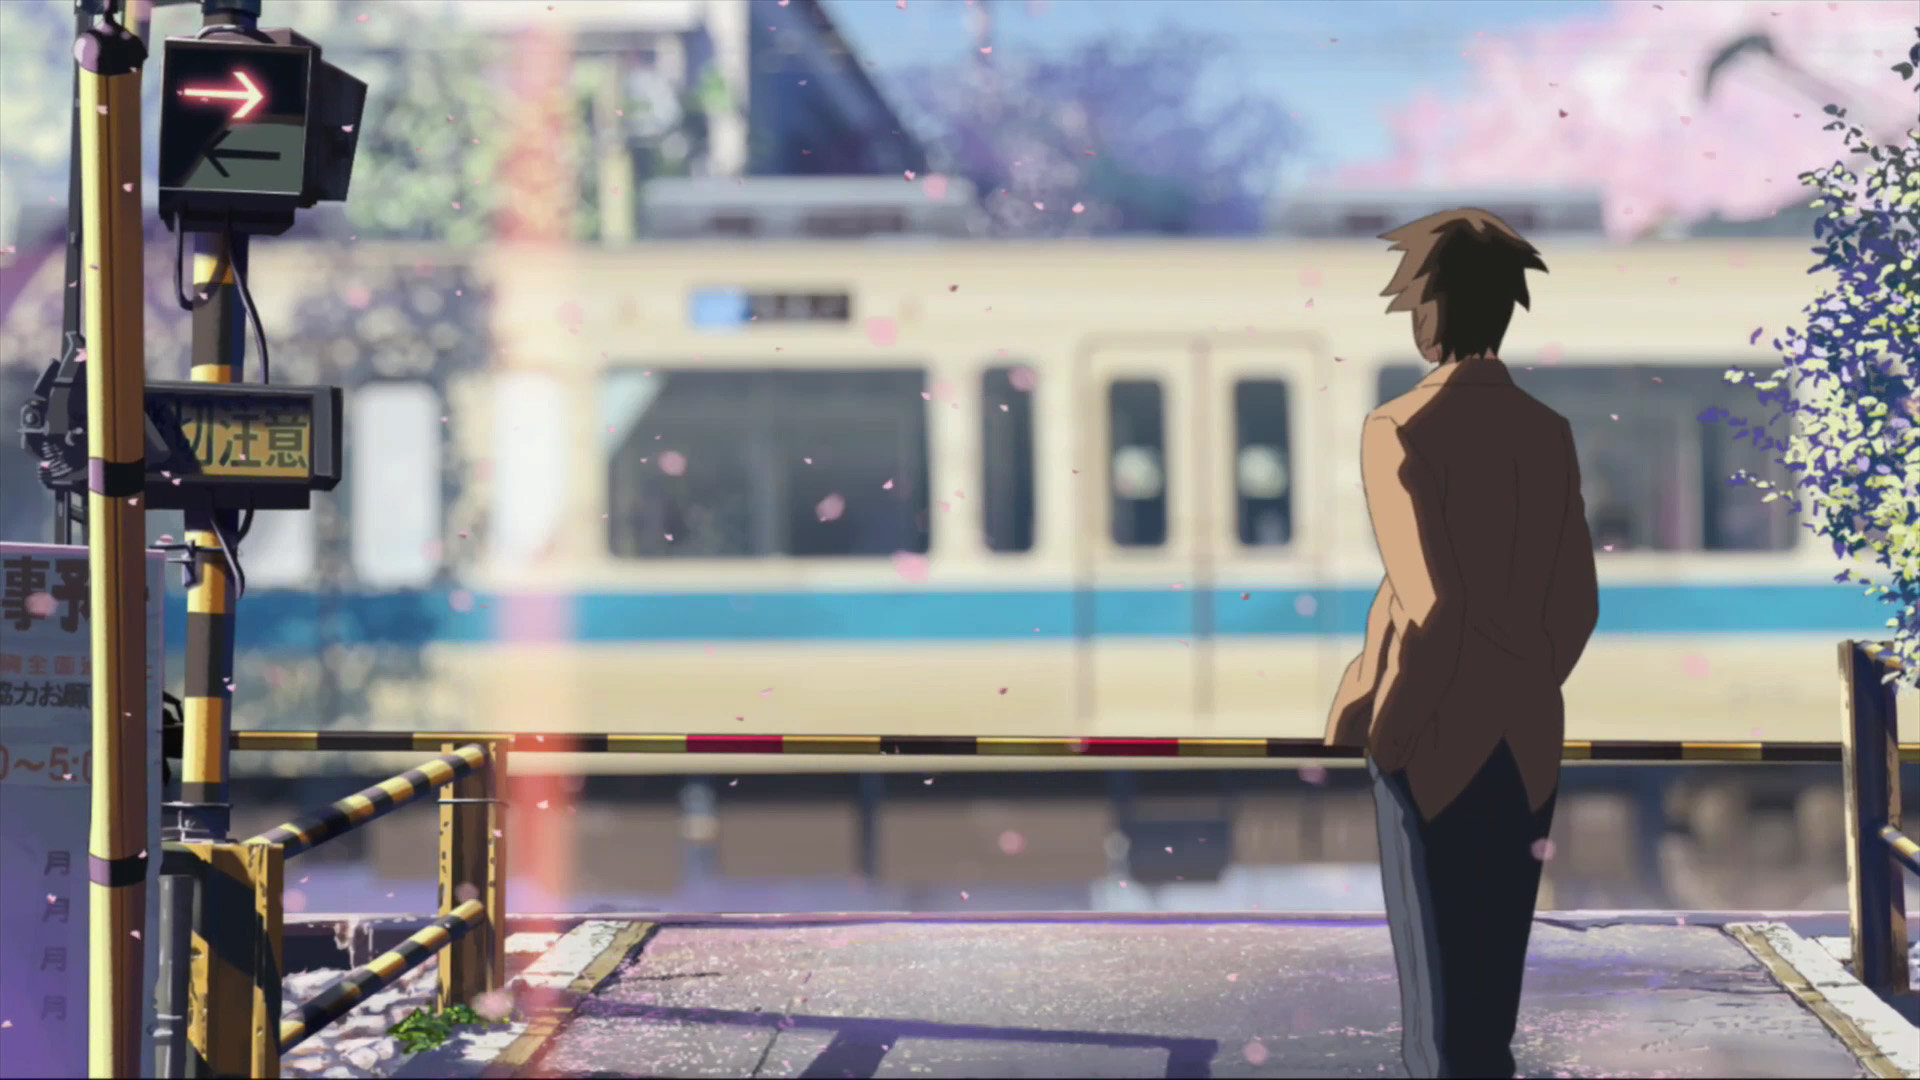 Download 1080p 5 (cm) Centimeters Per Second PC wallpaper ID:90086 for free